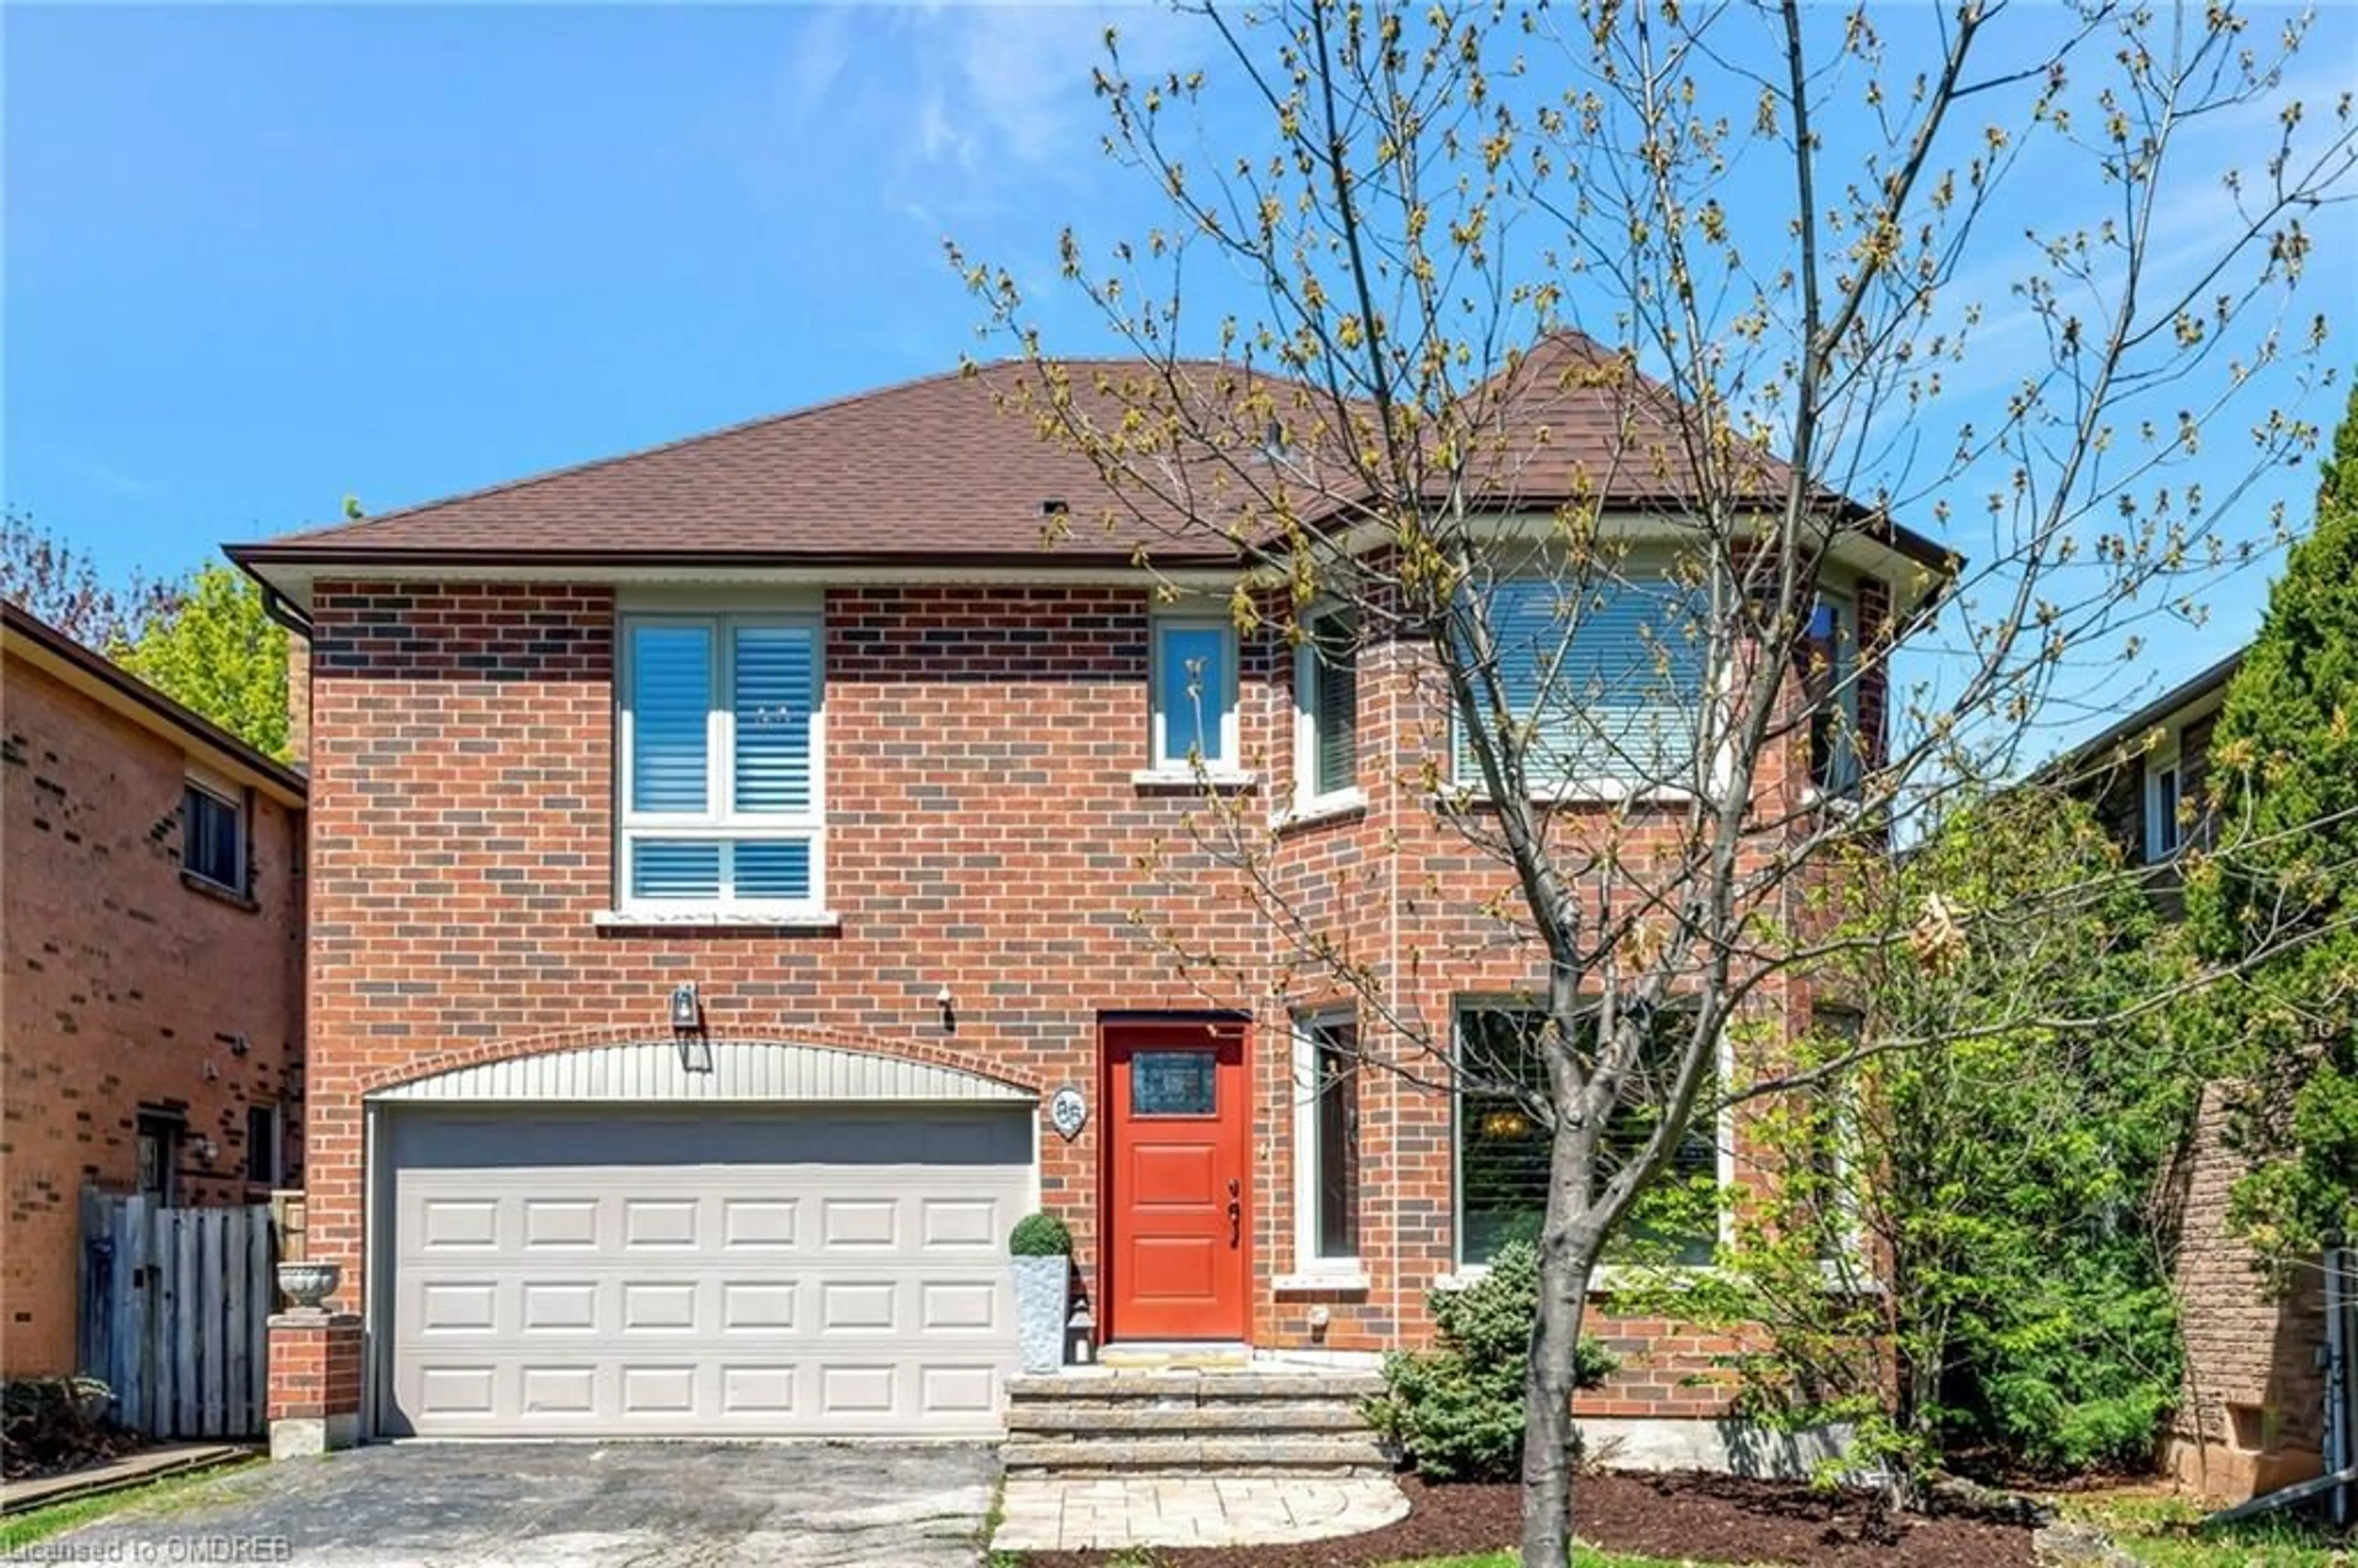 Home with brick exterior material for 85 River Oaks Blvd, Oakville Ontario L6H 3N4